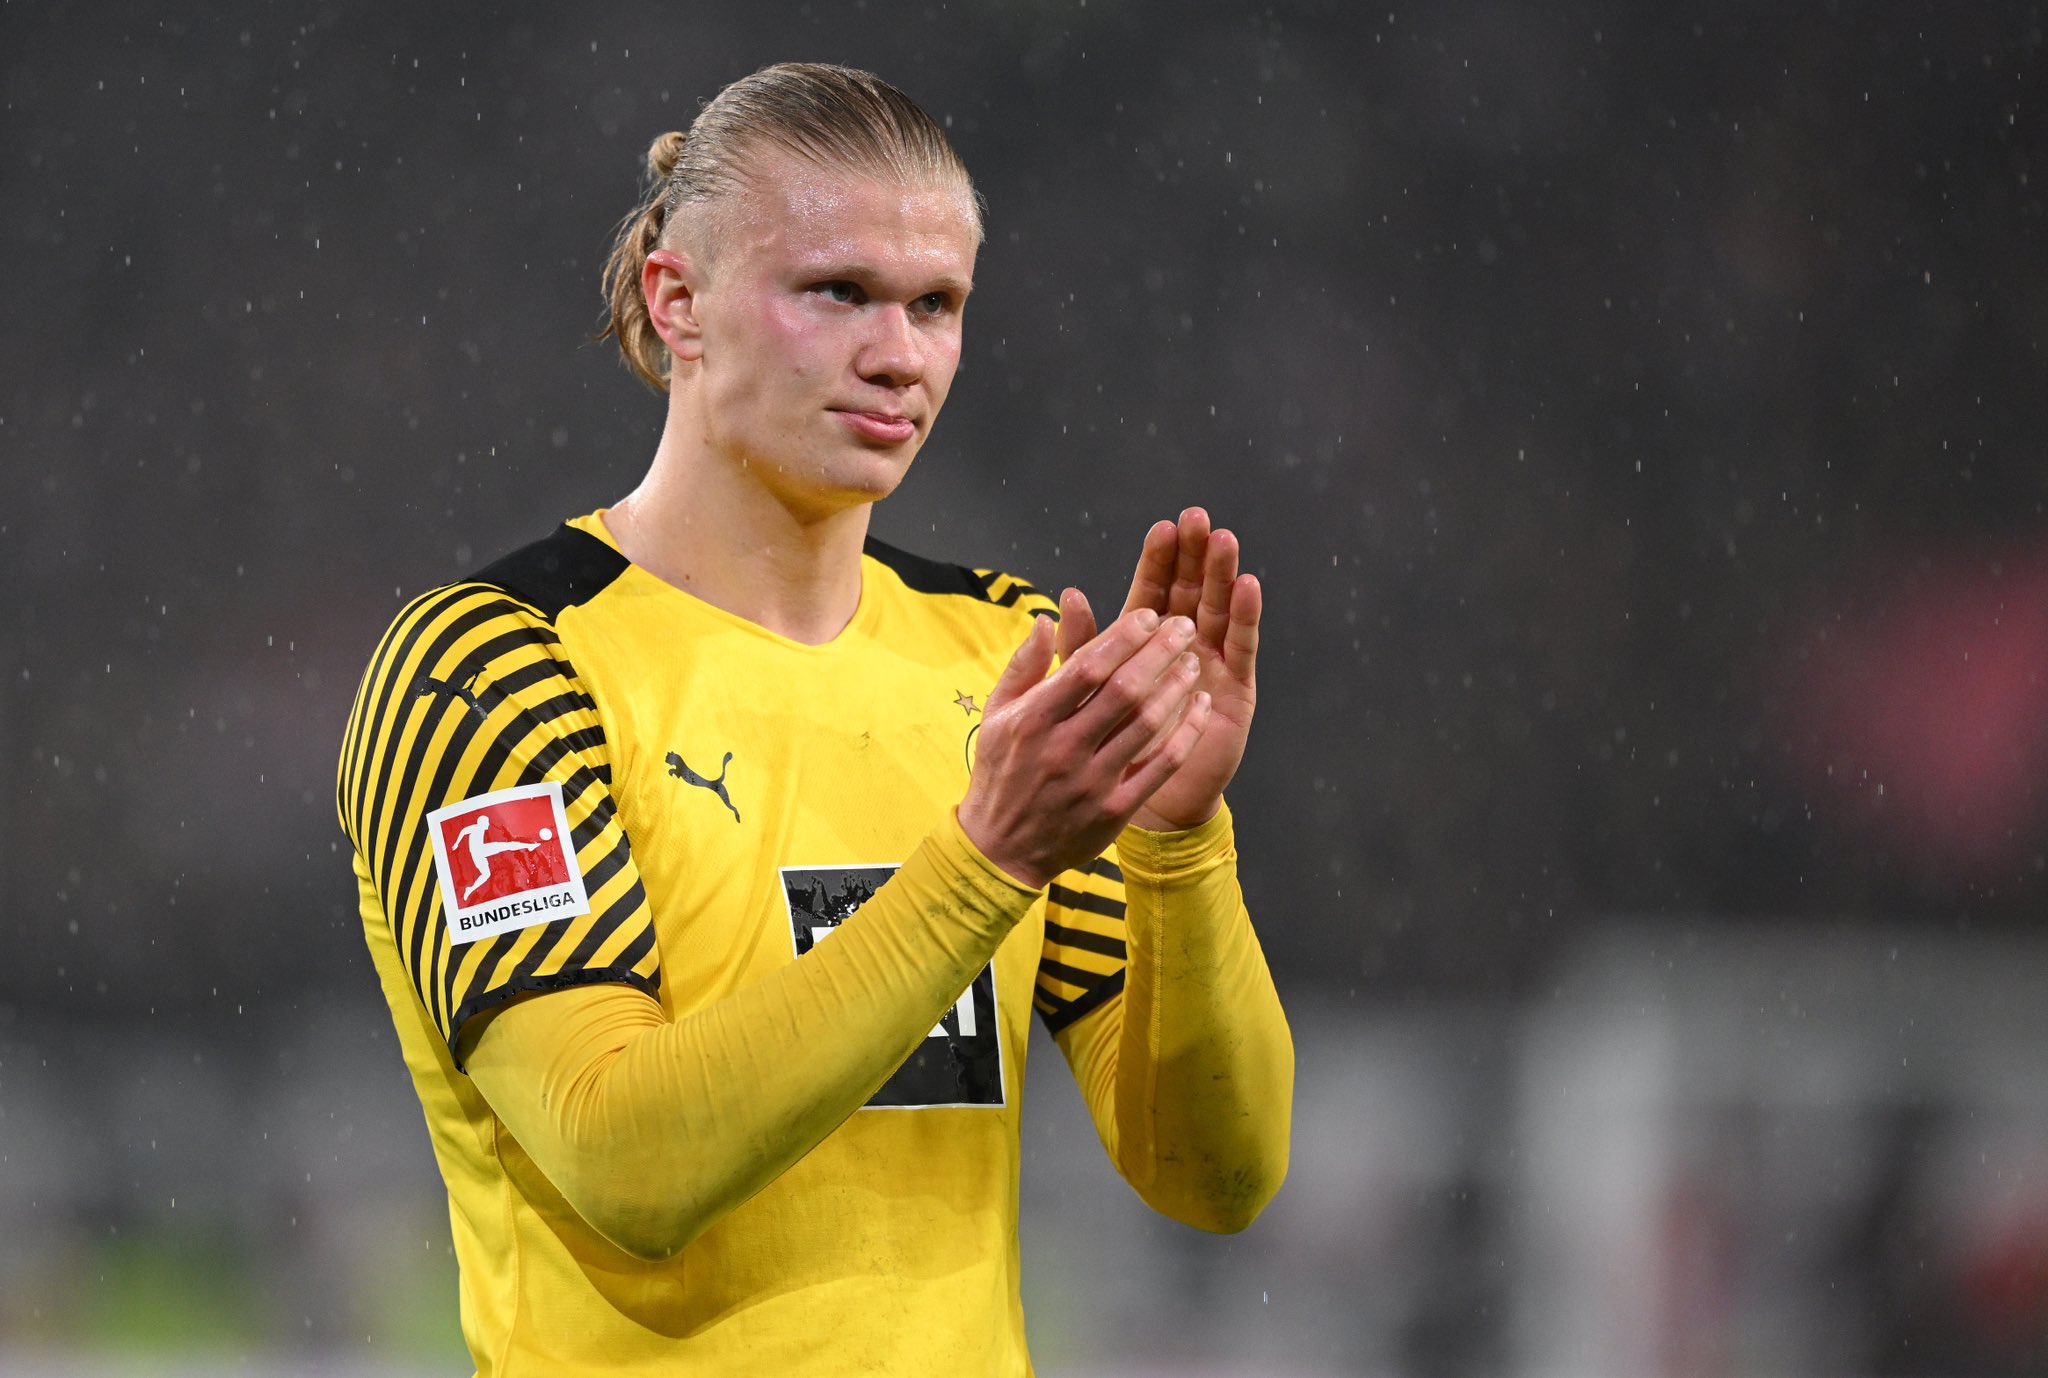 Manchester City have agreed terms on a £500,000-a-week contract to sign Erling Haaland ... Which will make him the highest-paid player in the Premier League